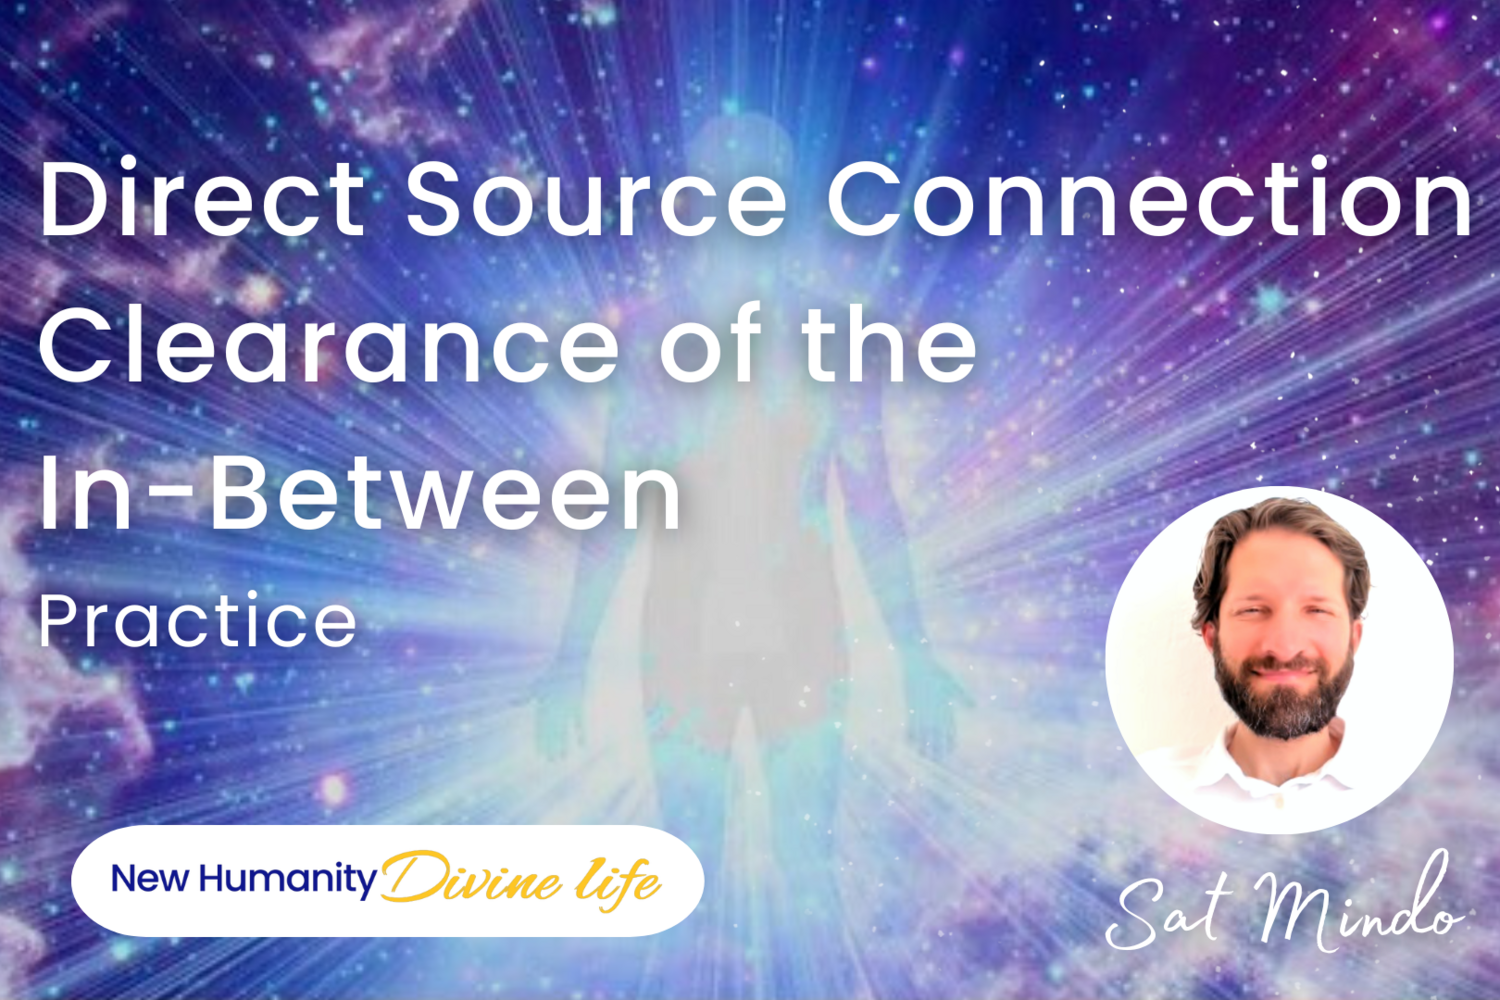 Direct Source Connection & Clearance of the In-Between Practice